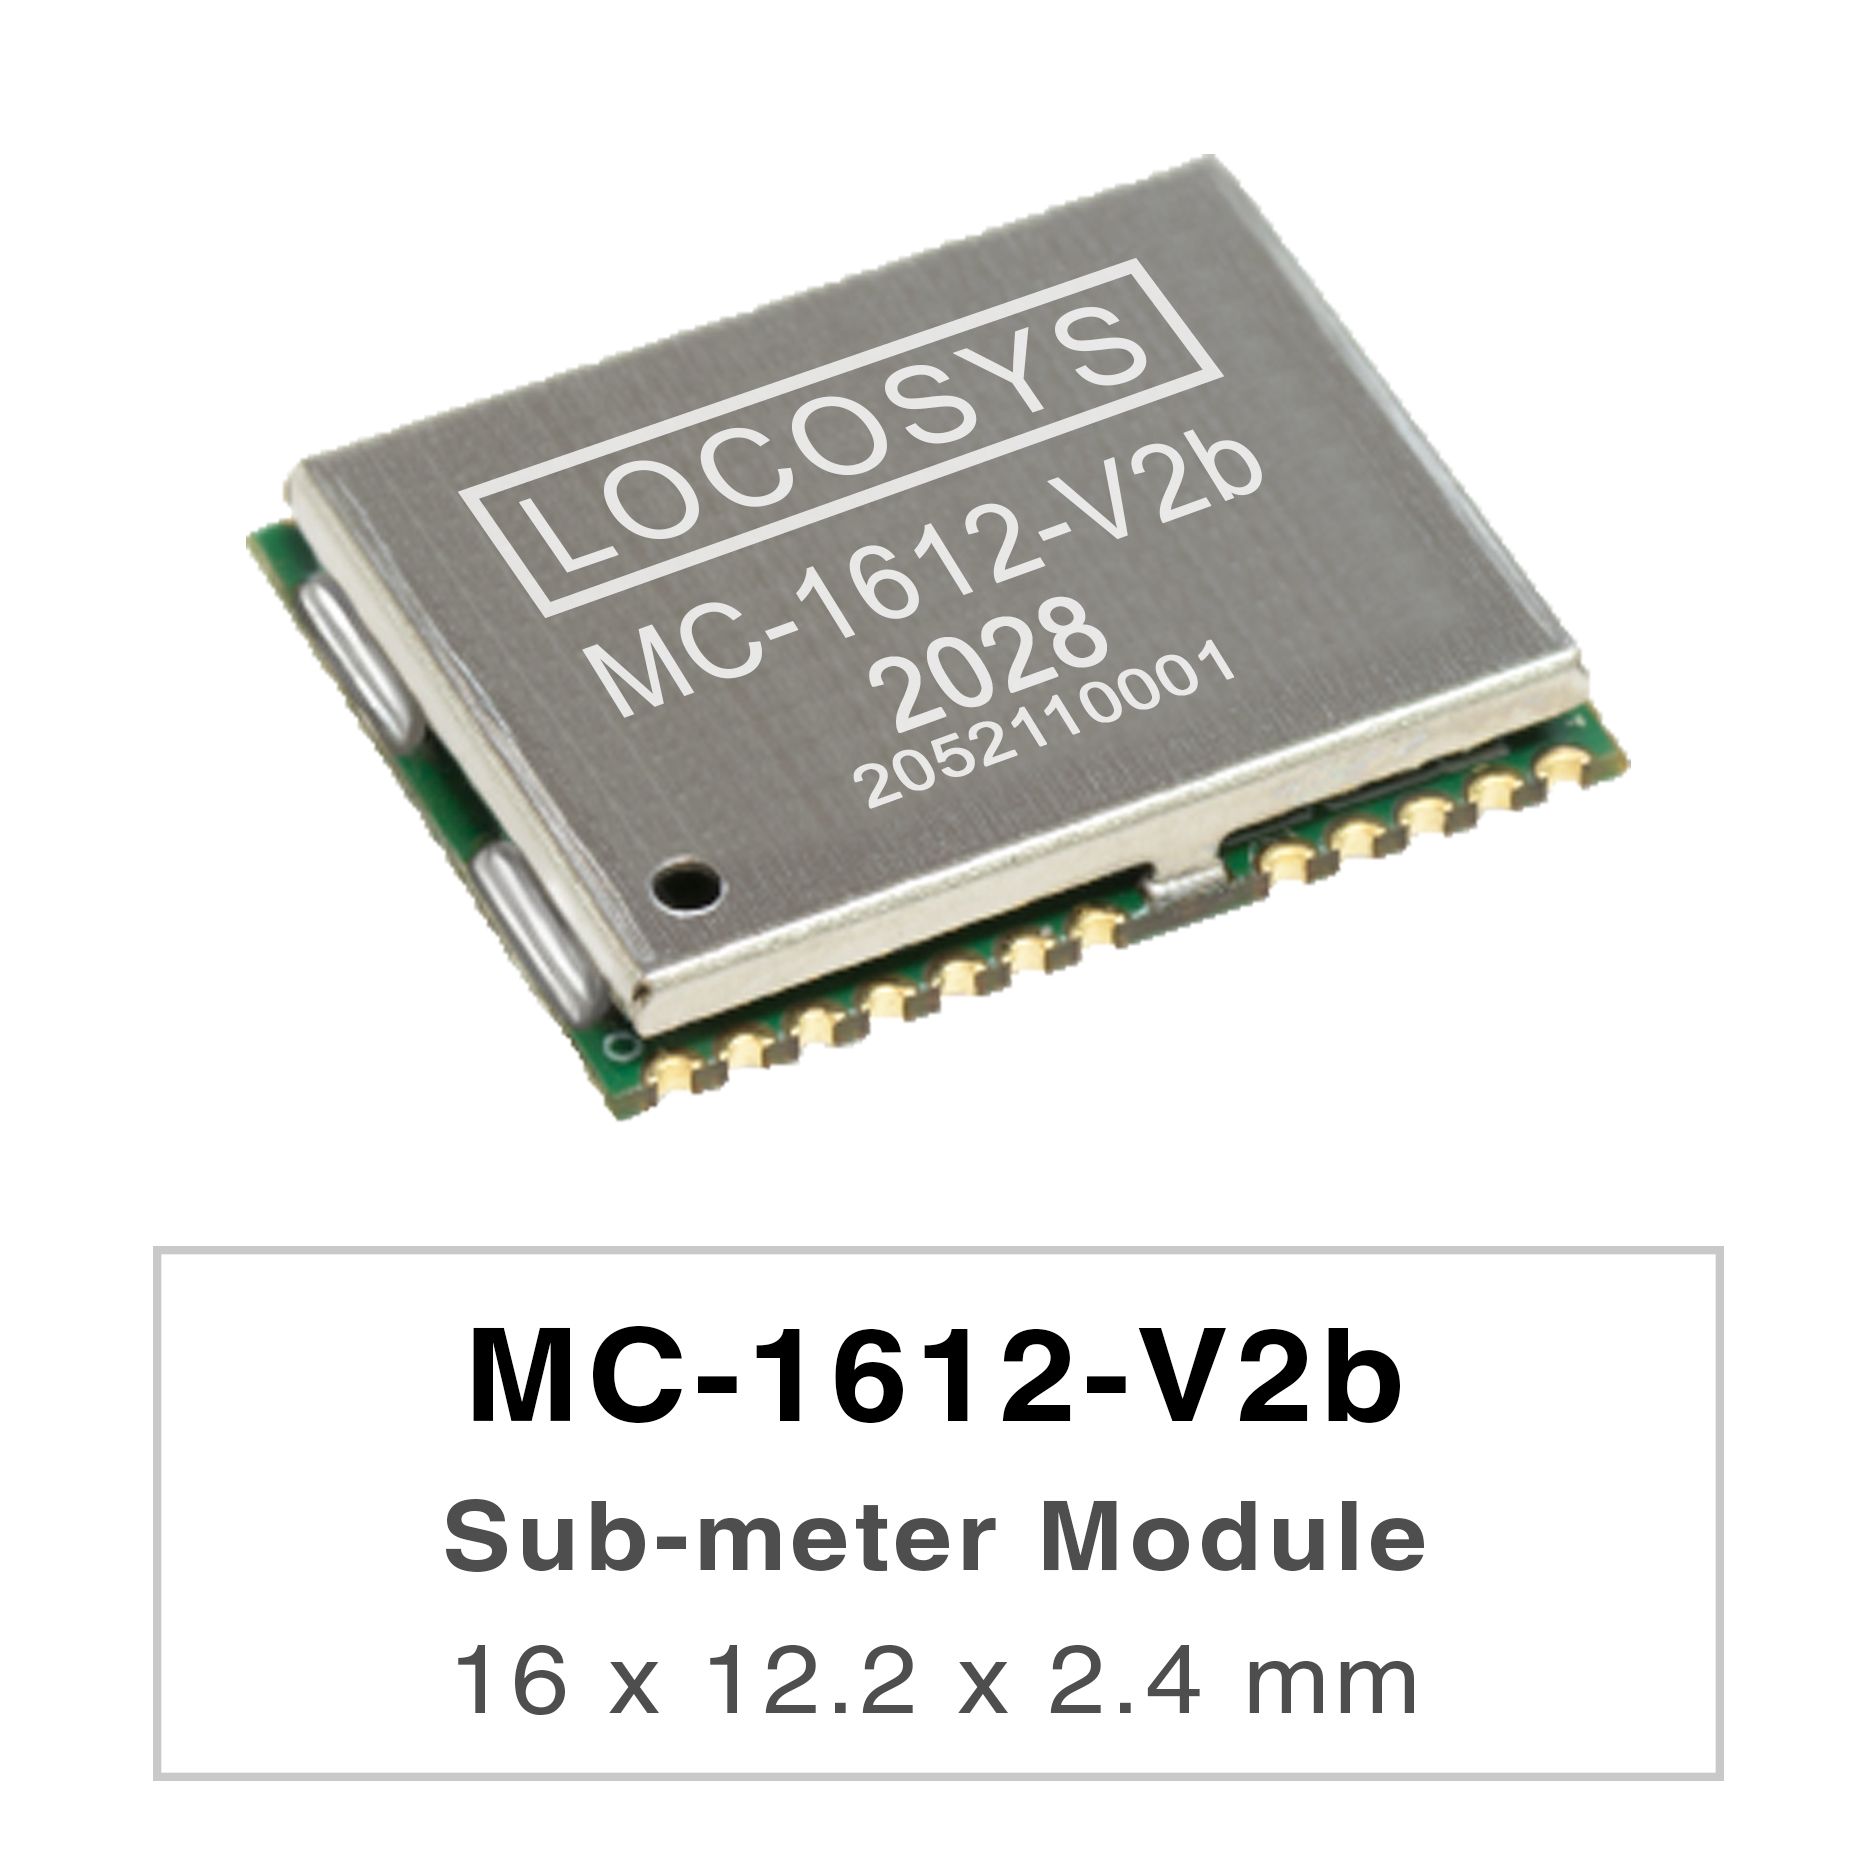 LOCOSYS MC-1612-Vxx series are high-performance dual-band GNSS positioning modules that are
     <br />capable of tracking all global civil navigation systems. They adopt 12 nm process and integrate efficient
     <br />power management architecture to perform low power and high sensitivity.